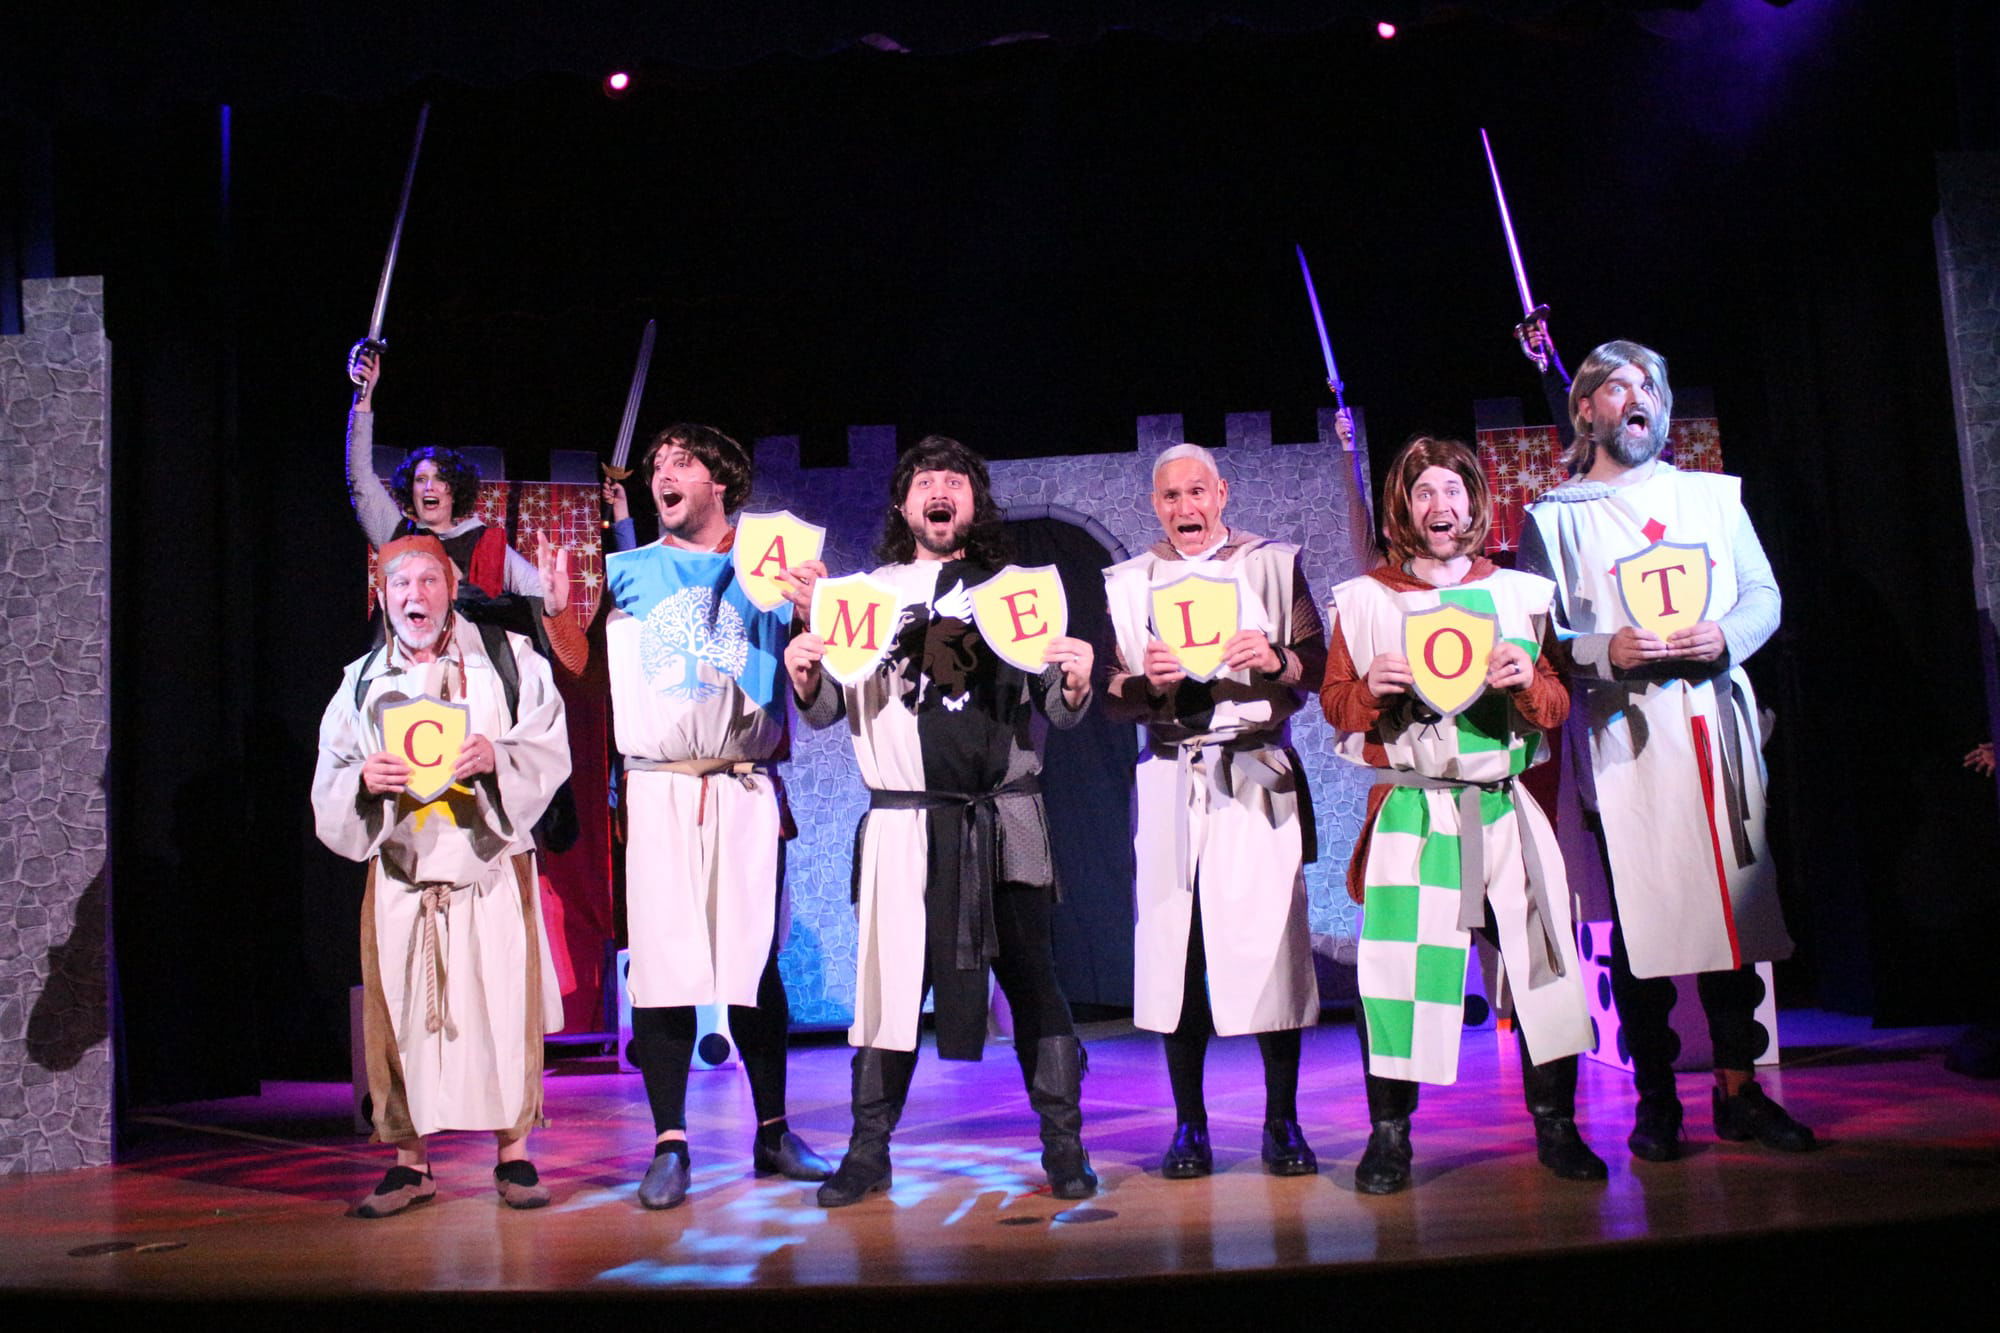 Monty Python's "SPAMALOT" - by Eric Idle and John du Prez - Square One Players (Shrewsbury, MA.) - REVIEW